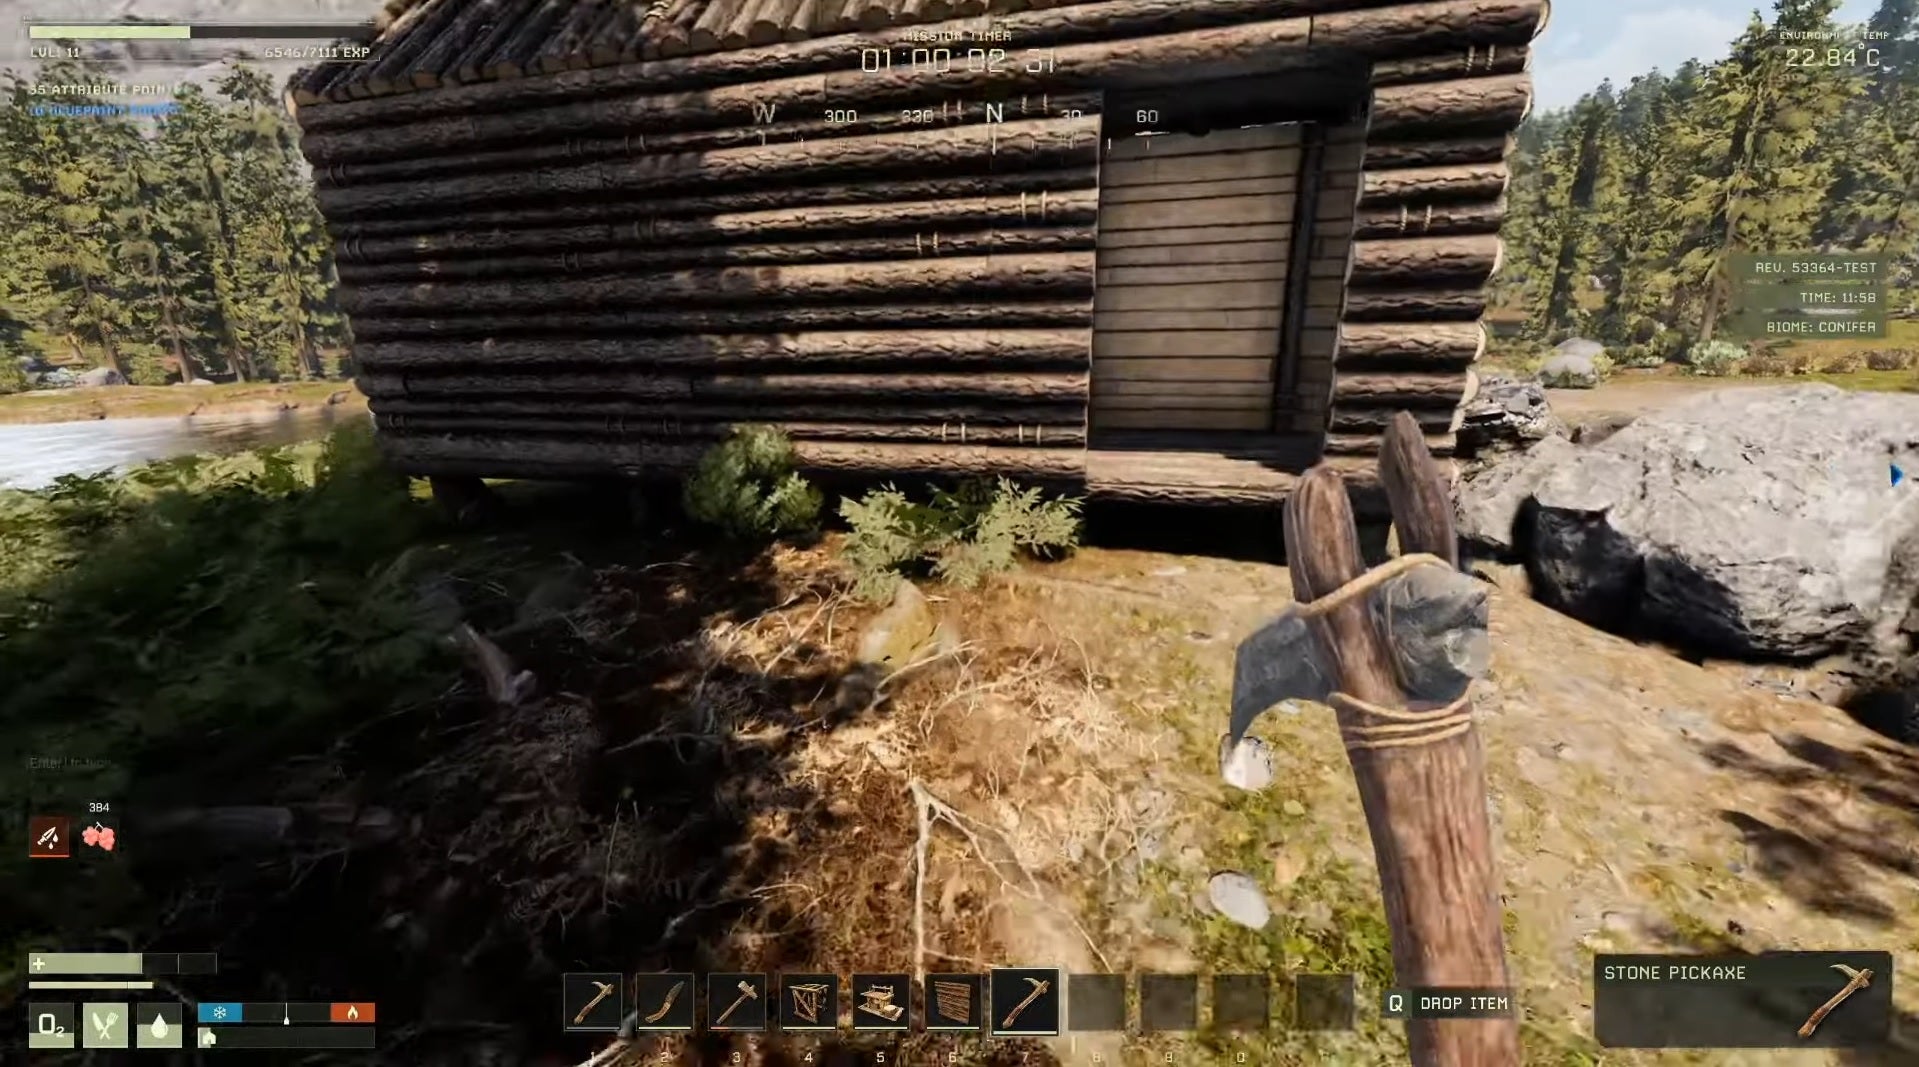 Icarus - In first person, the player holds a handmade stone axe while looking at a log cabin surrounded by woods.